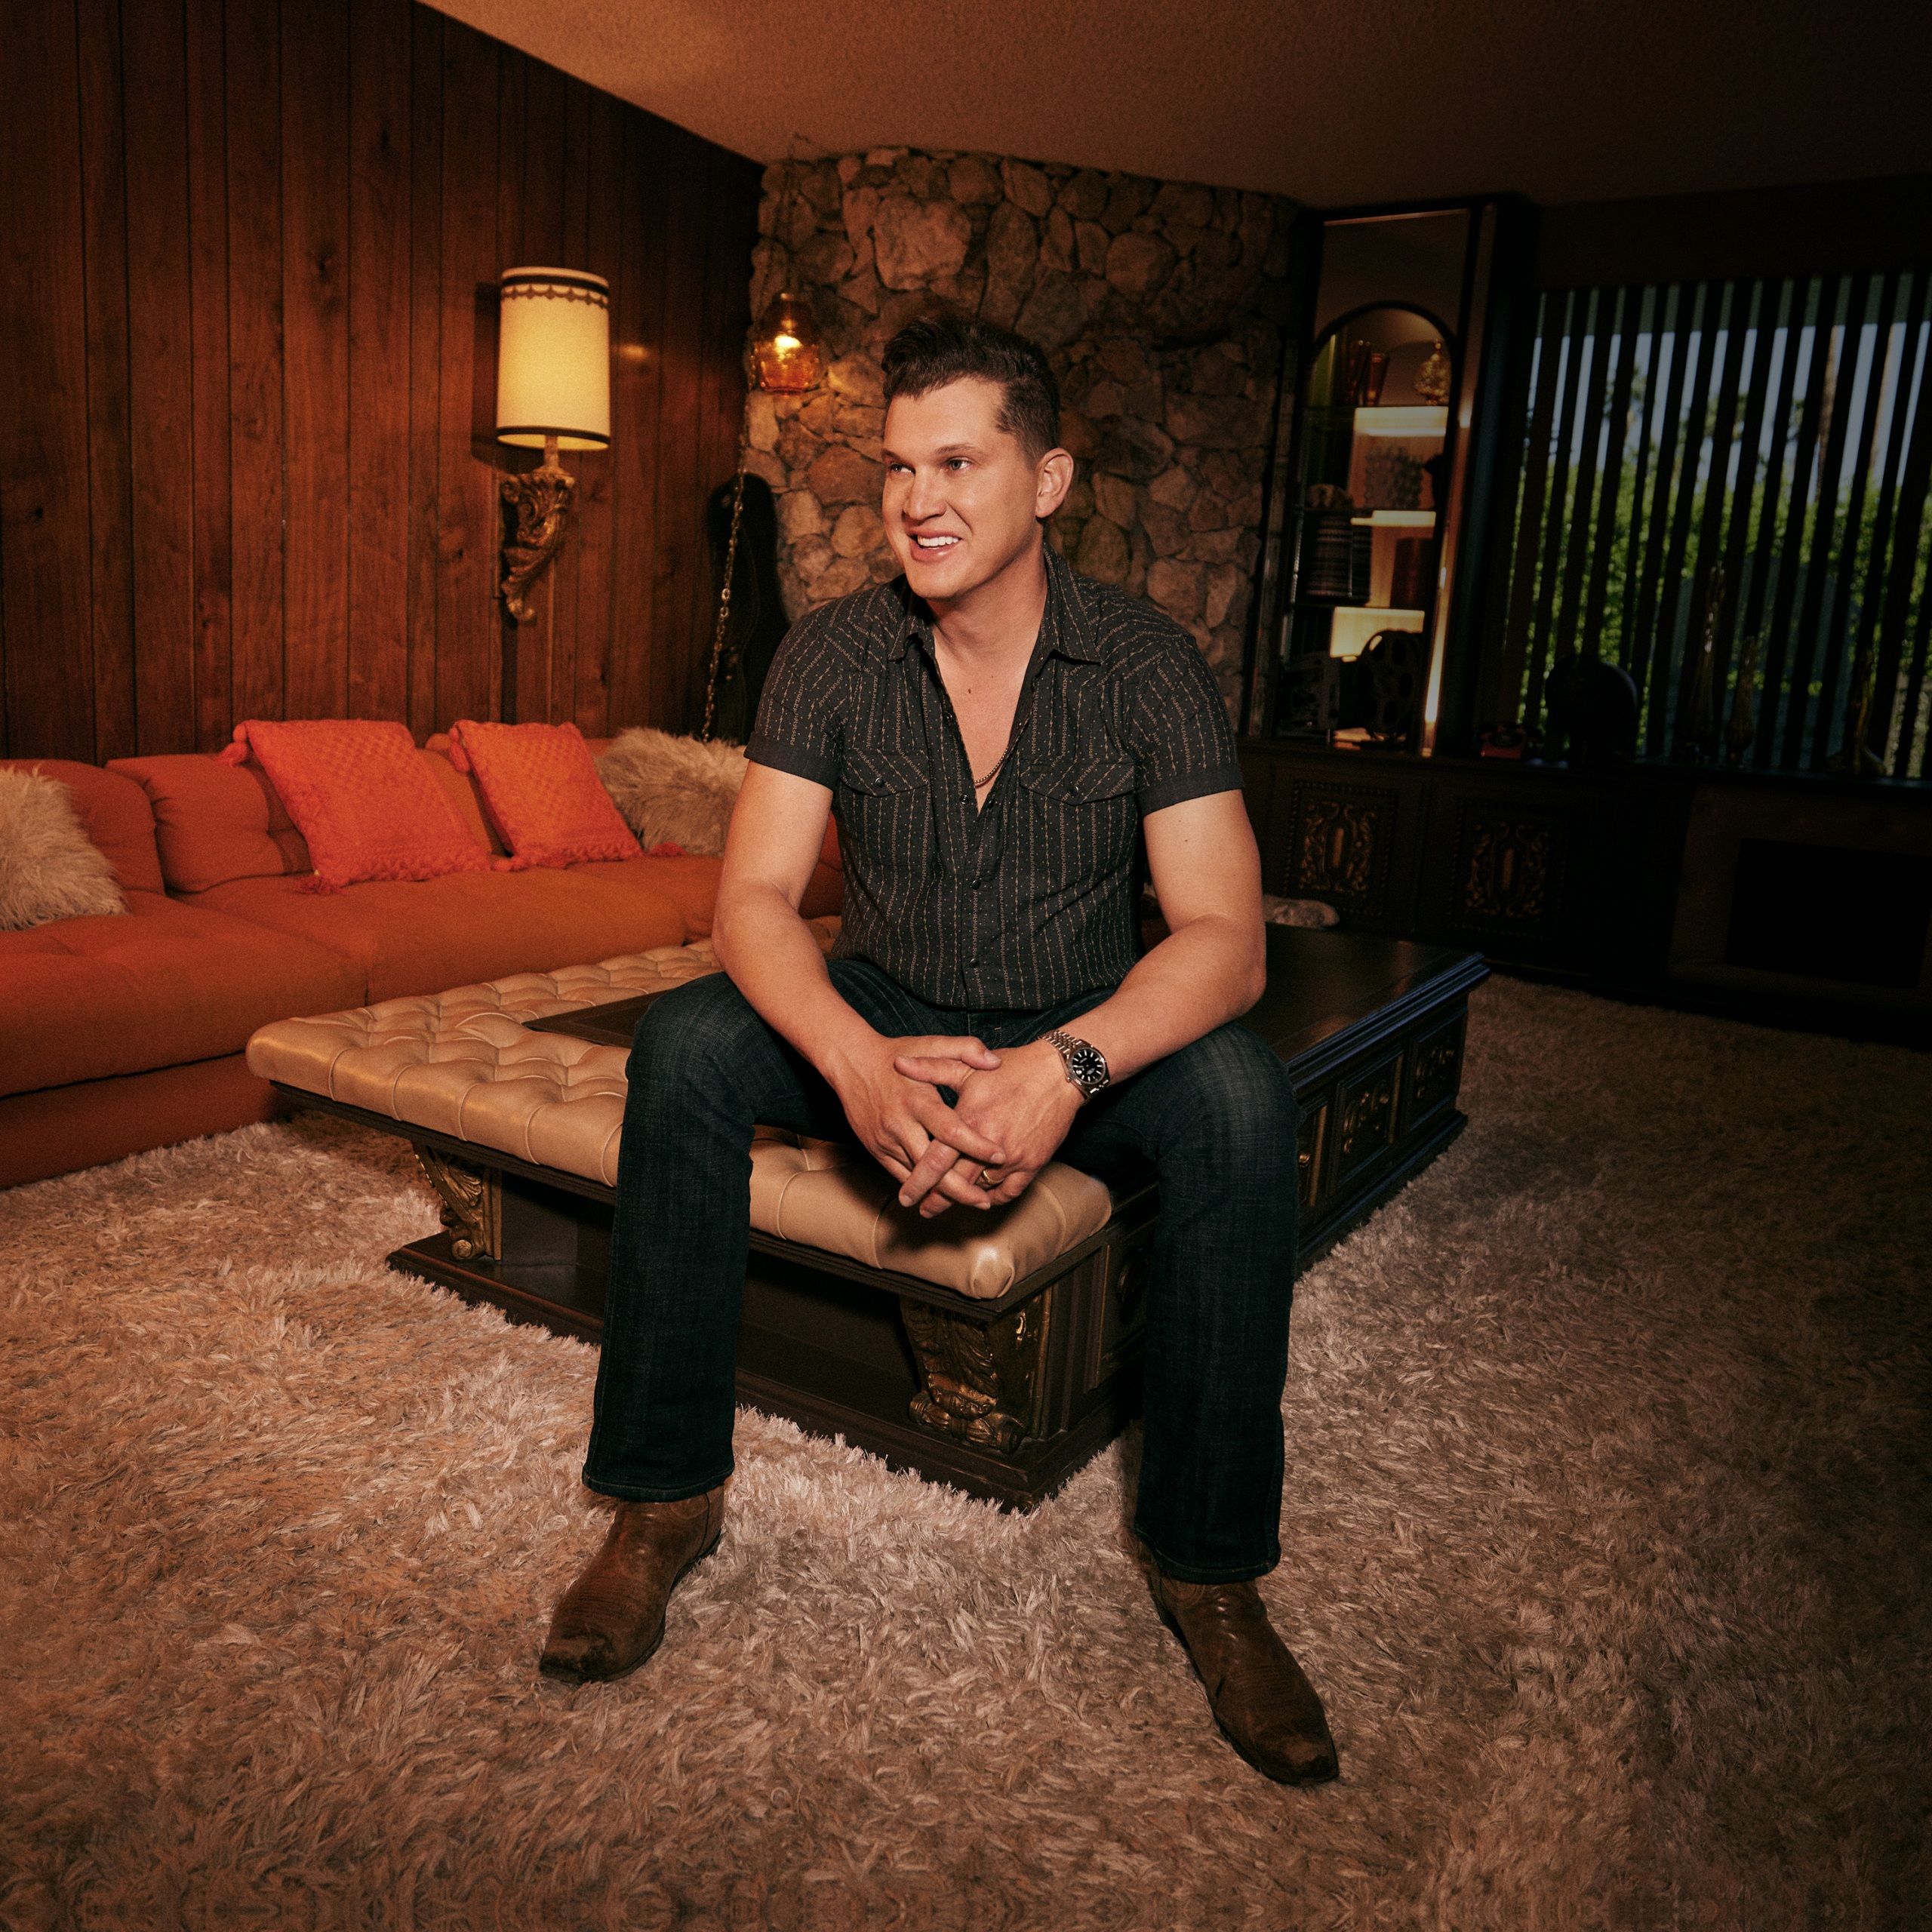 JON PARDI TOPS THE CHARTS, EARNS FIFTH #1 WITH “LAST NIGHT LONELY”